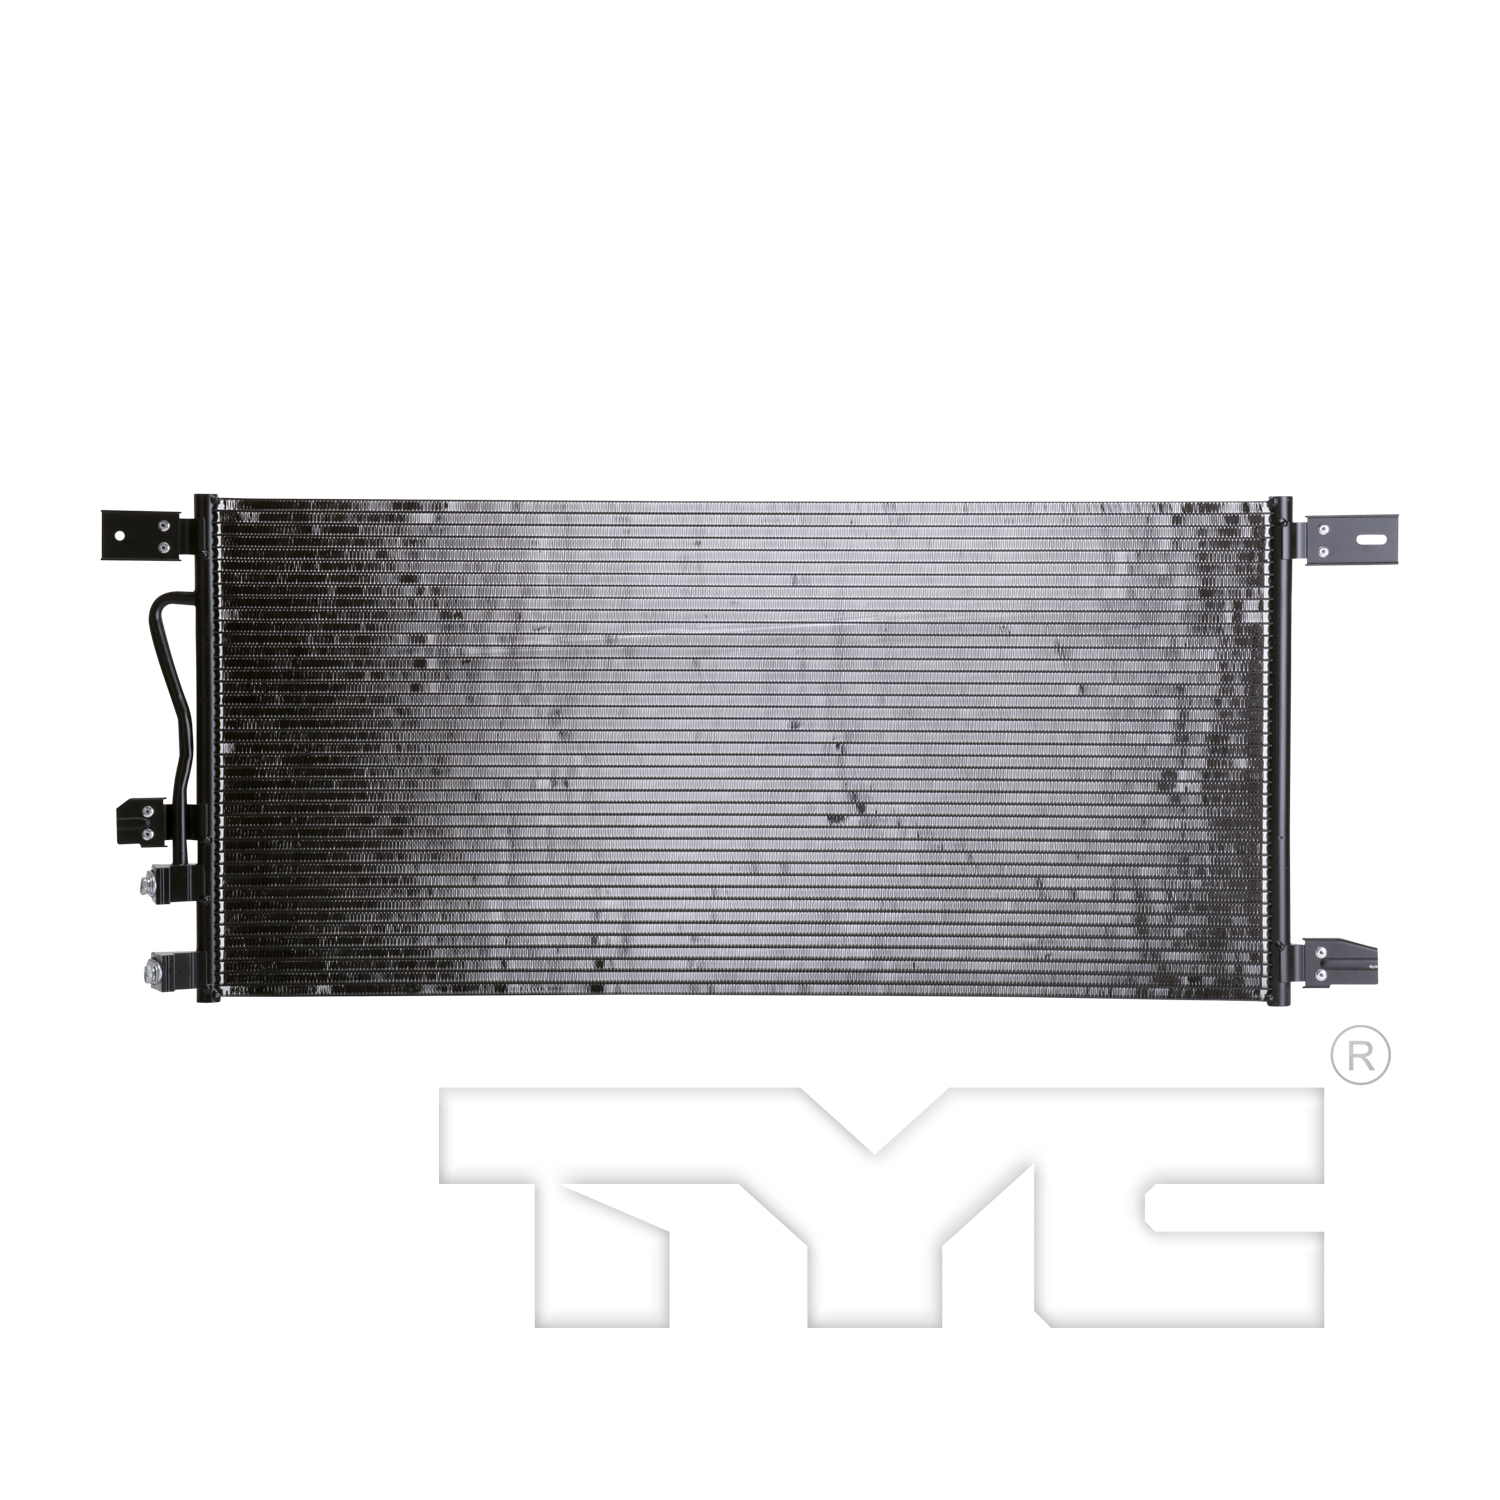 Aftermarket AC CONDENSERS for FORD - F-350 SUPER DUTY, F-350 SUPER DUTY,08-10,Air conditioning condenser